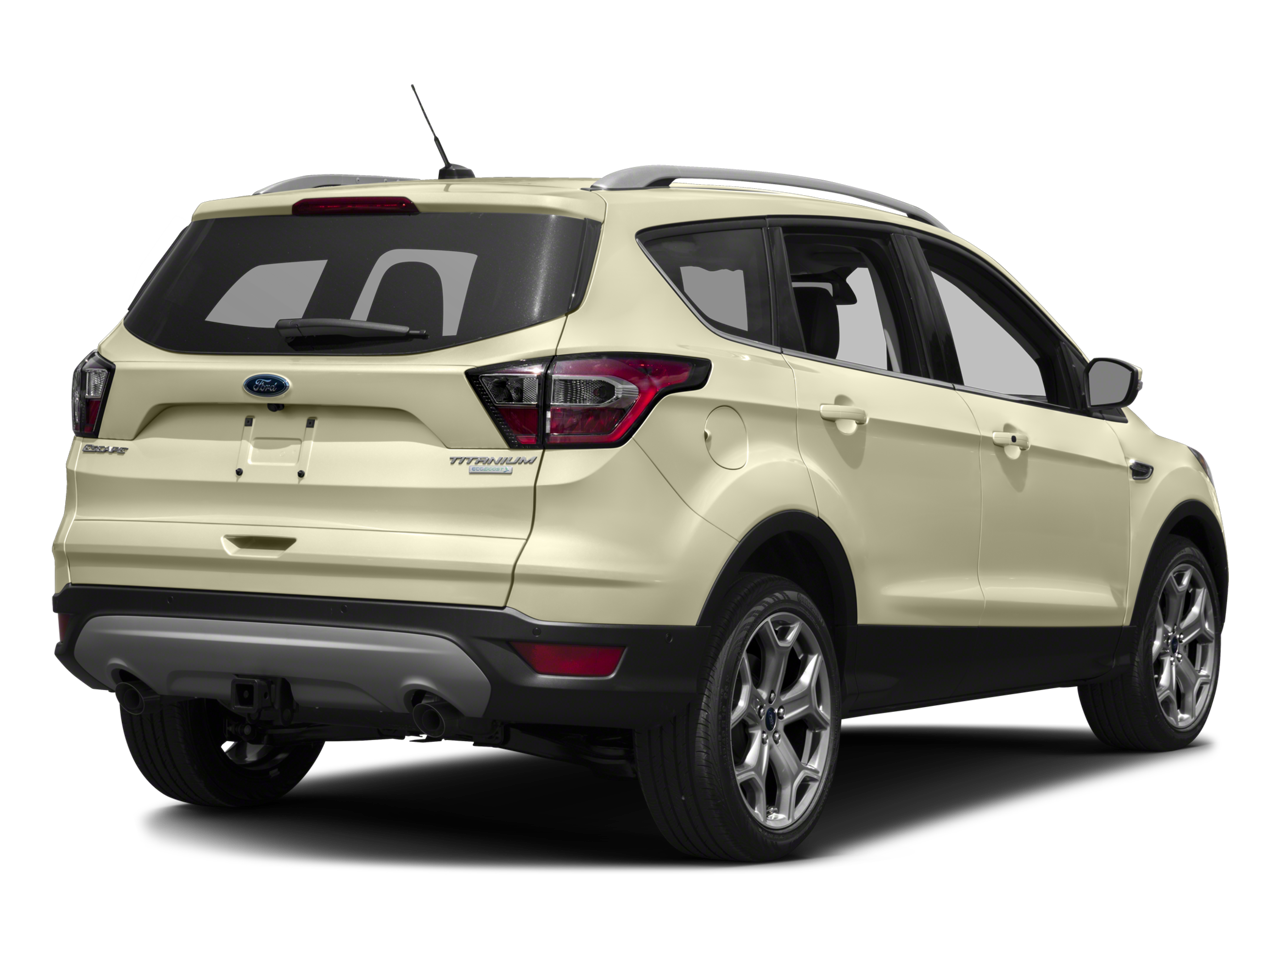 Used 2017 Ford Escape Titanium with VIN 1FMCU0JD5HUD24953 for sale in Palatka, FL